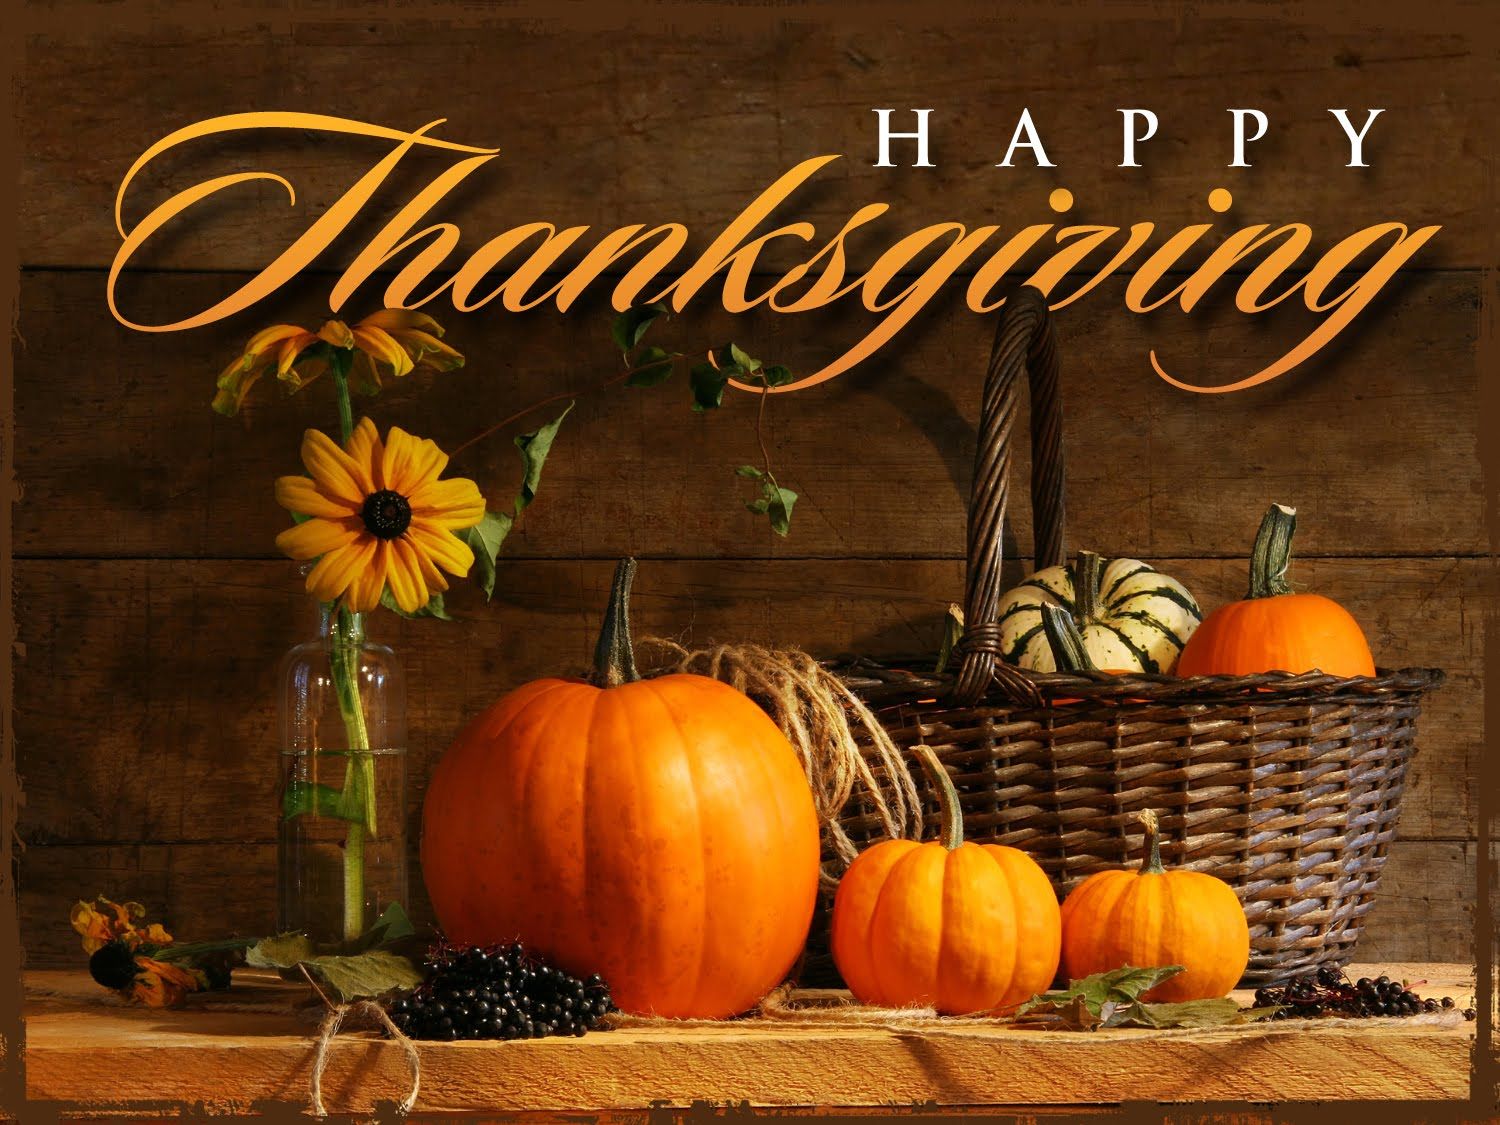 Happy-Thanksgiving-Images.jpg